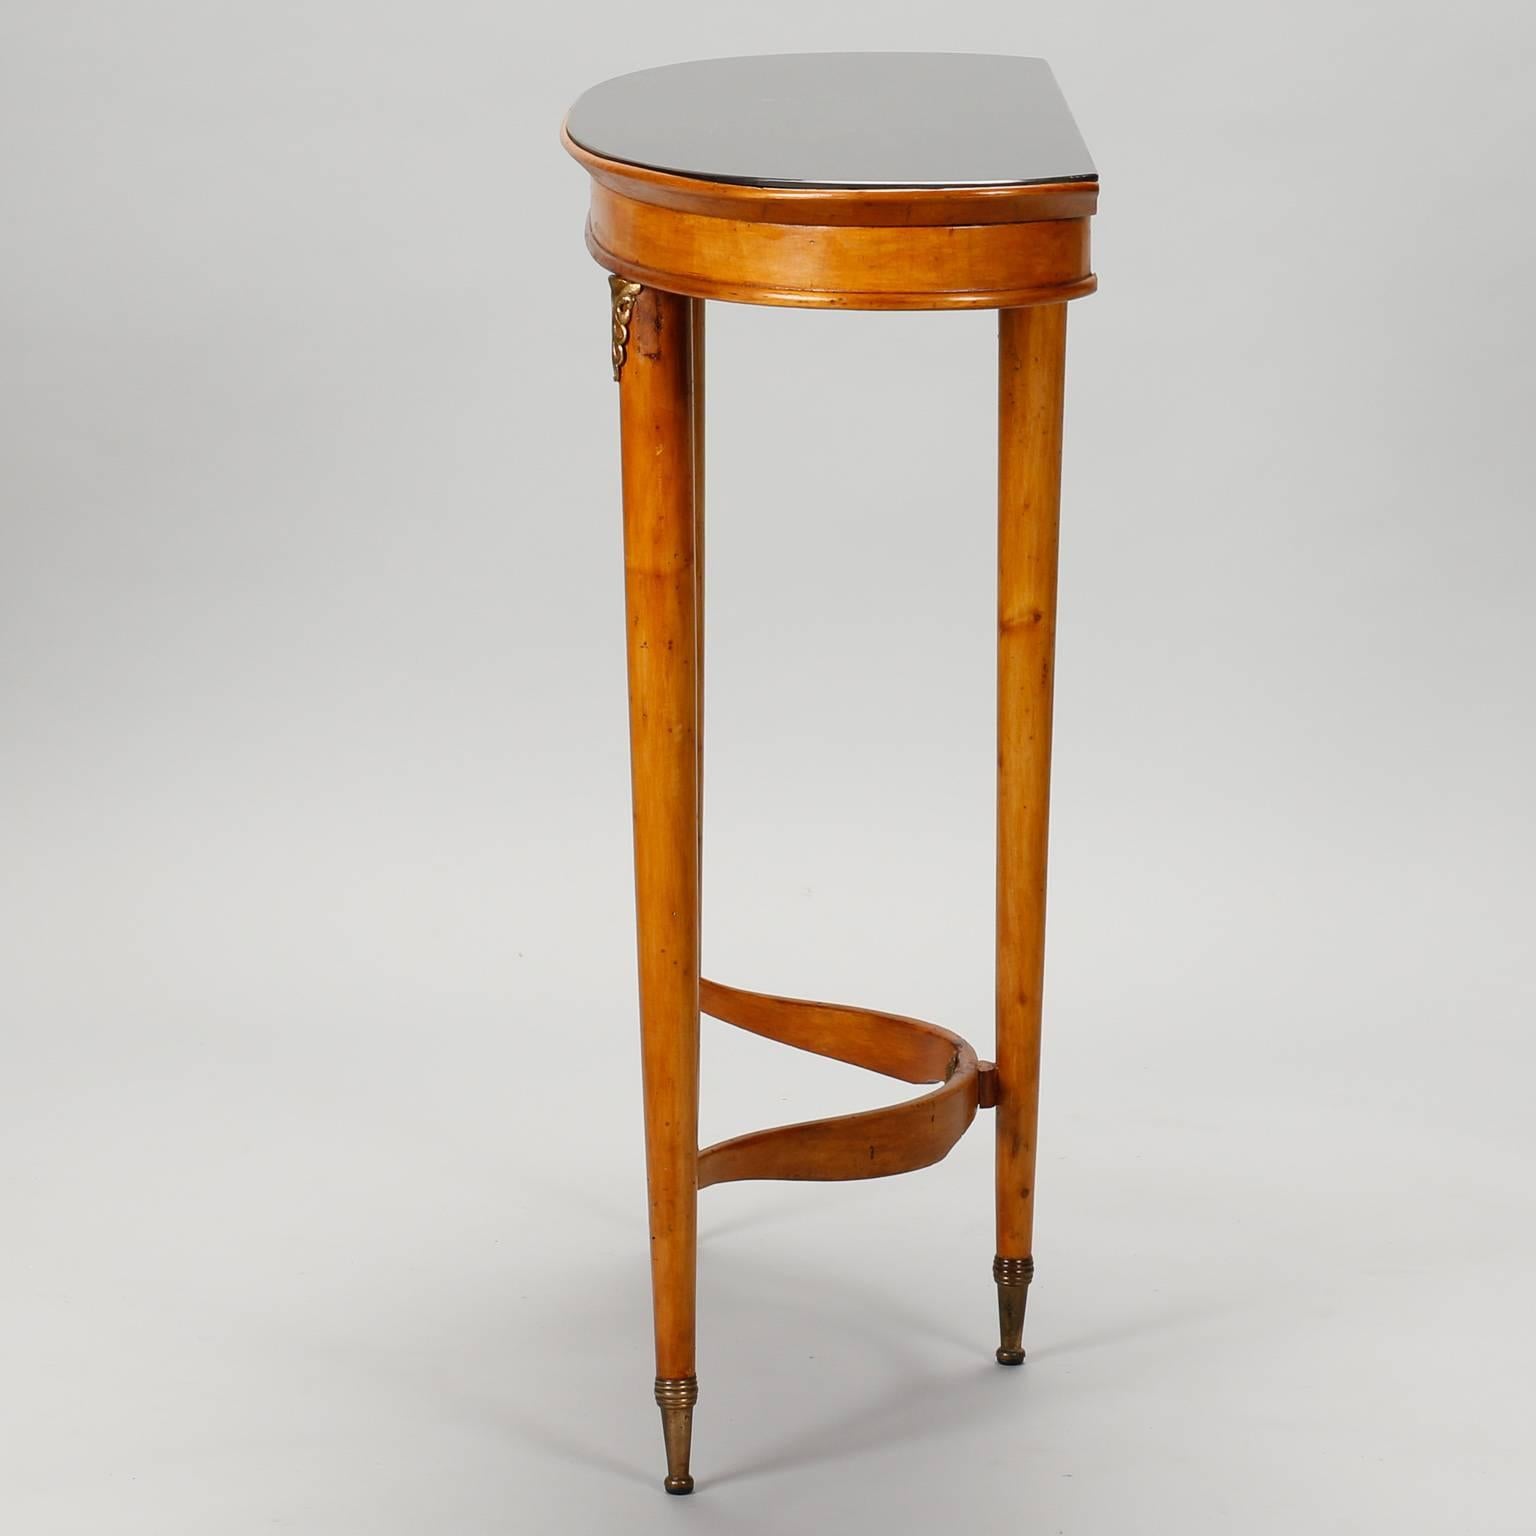 Found in France, this three-legged Art Deco era console has a demilune shaped top with black glass top, wood frame with three slender legs, curved stretcher and decorative brass fittings.
 